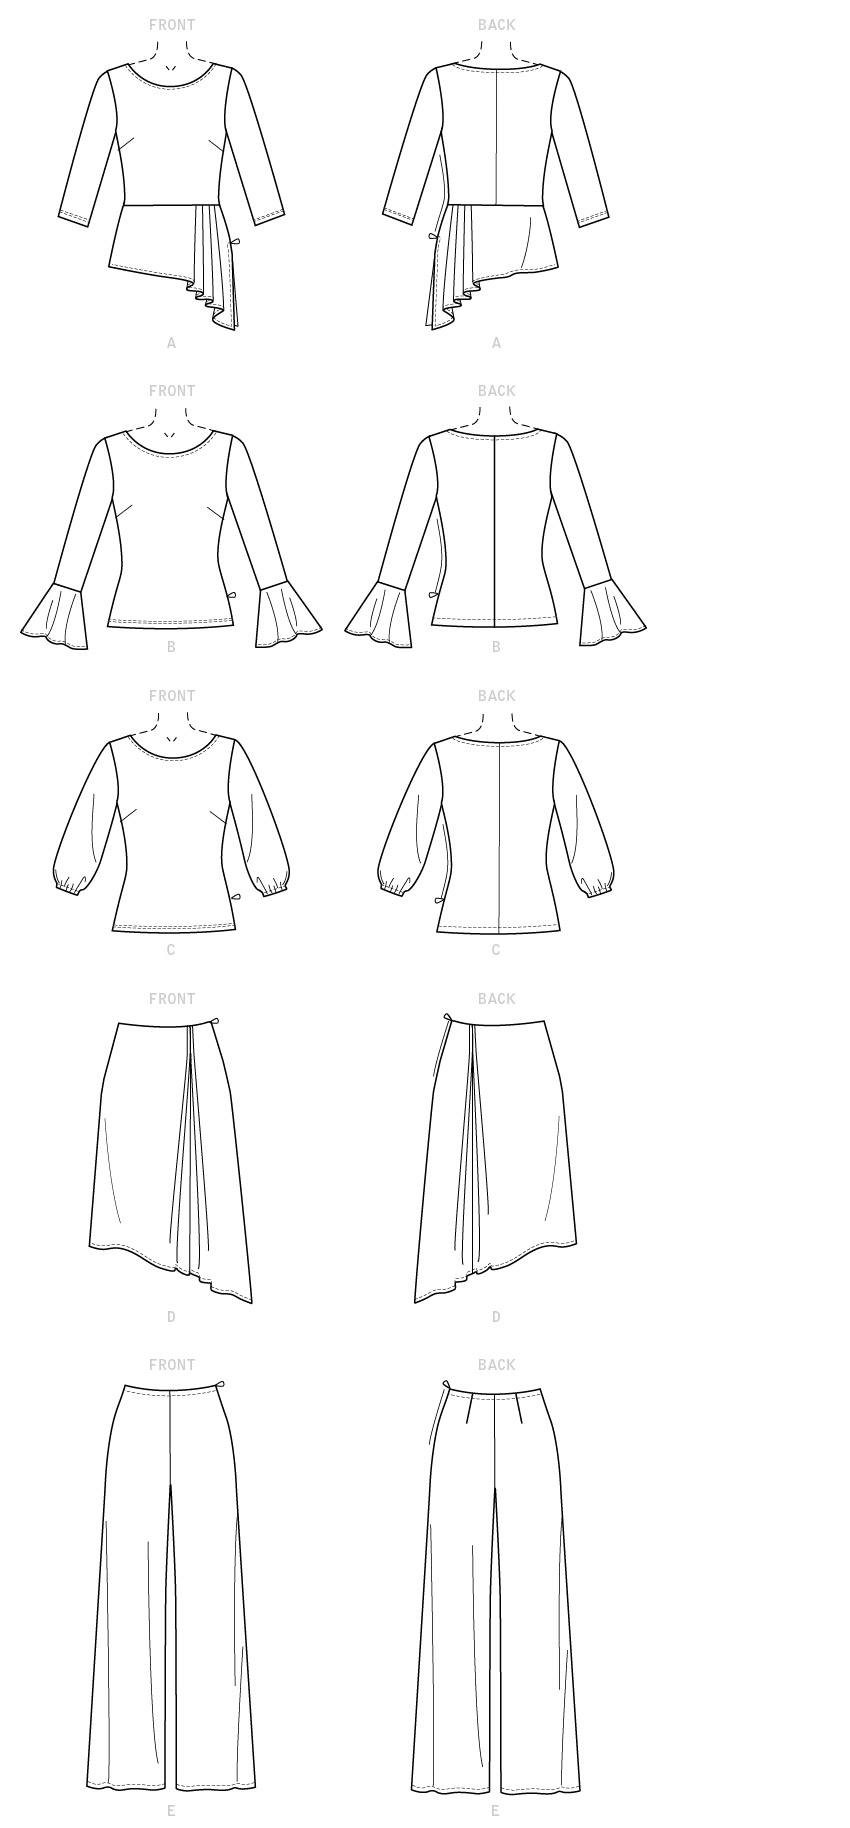 Butterick 6637 Misses'/ Misses' Petite Top, Skirt and Pants